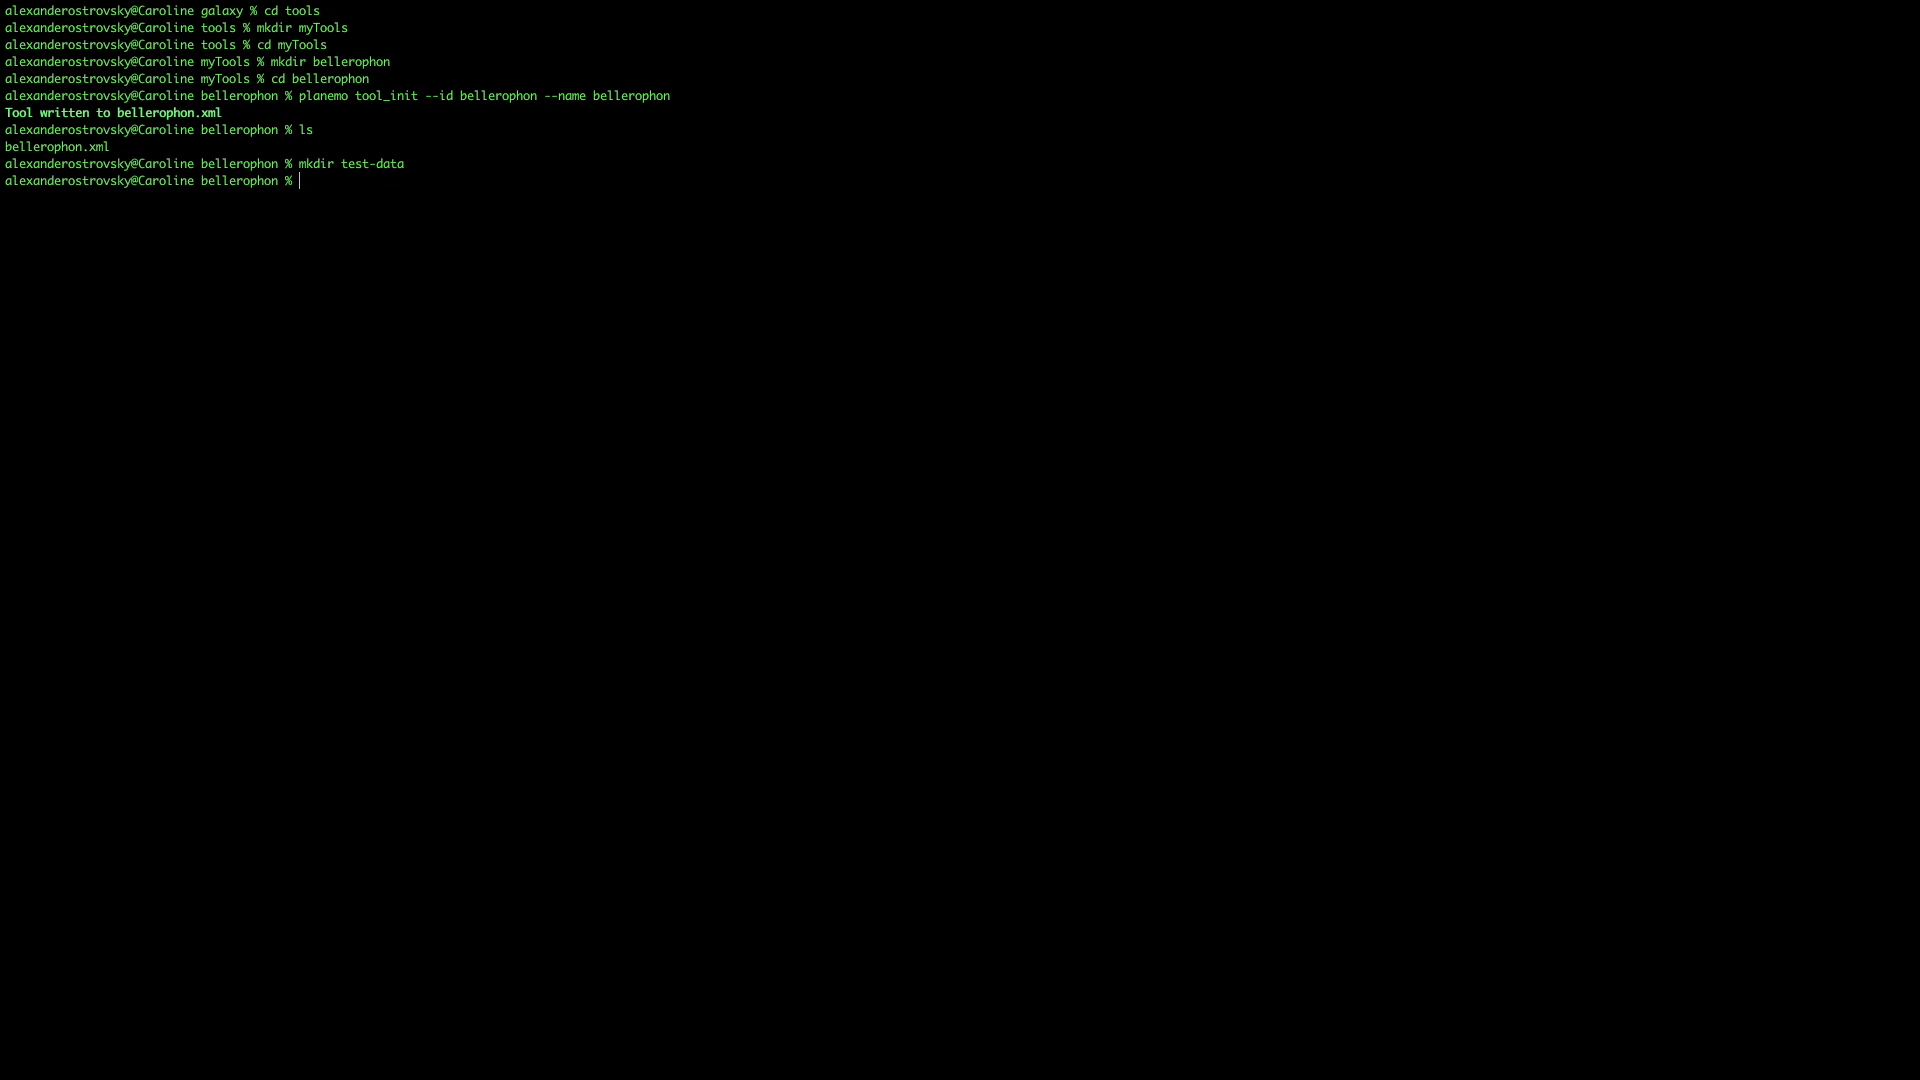 green text on black background console with tiny font